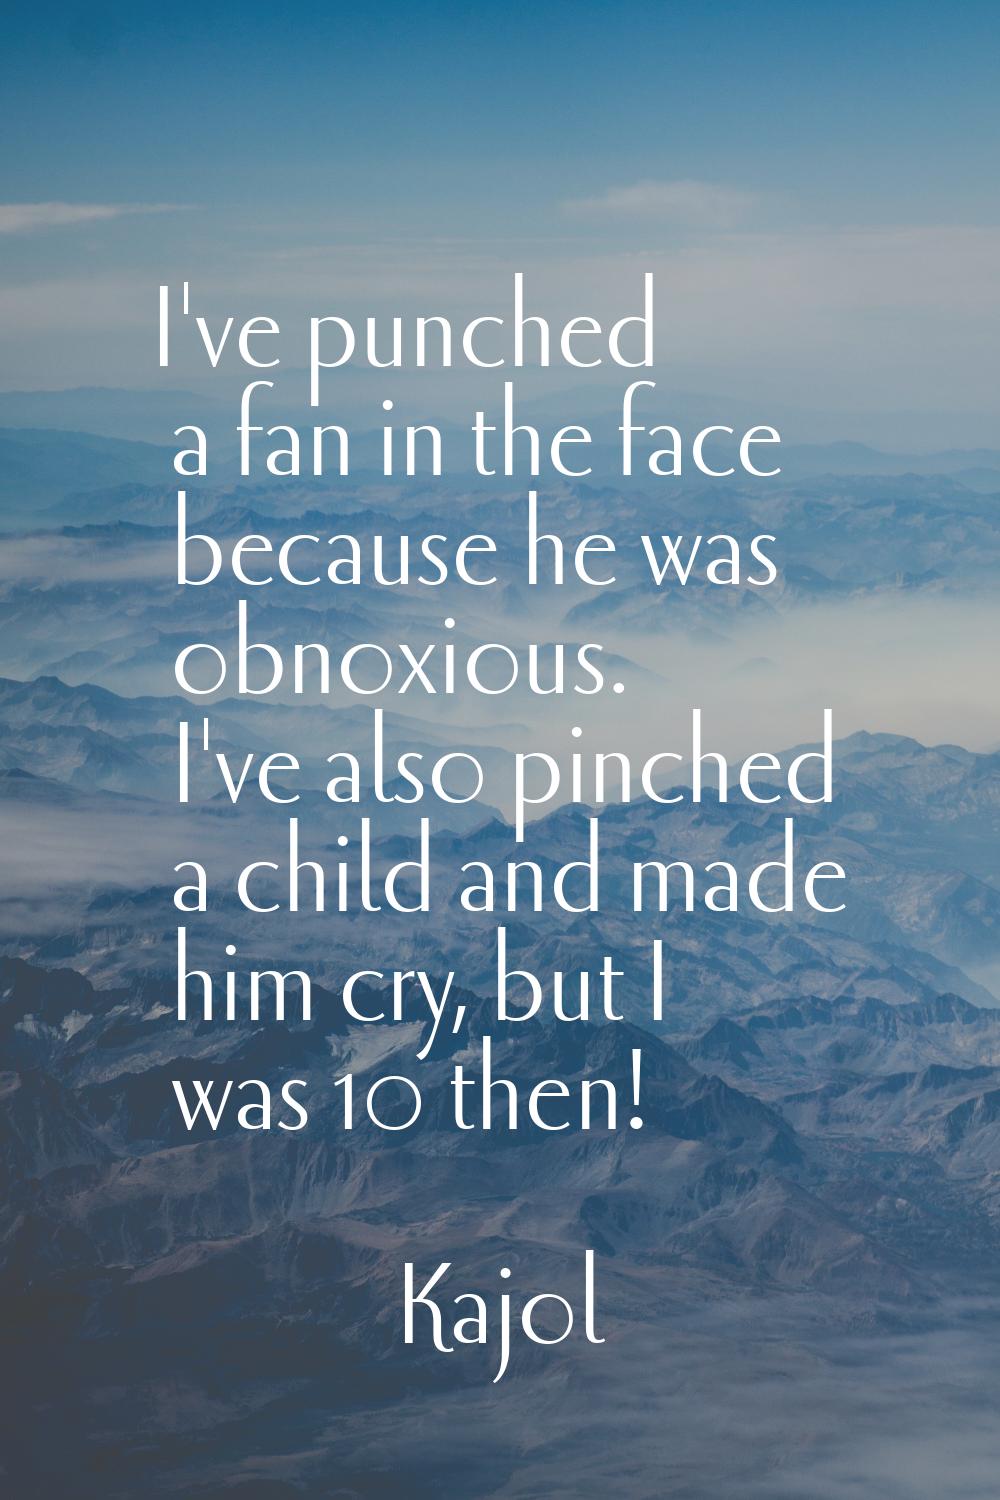 I've punched a fan in the face because he was obnoxious. I've also pinched a child and made him cry